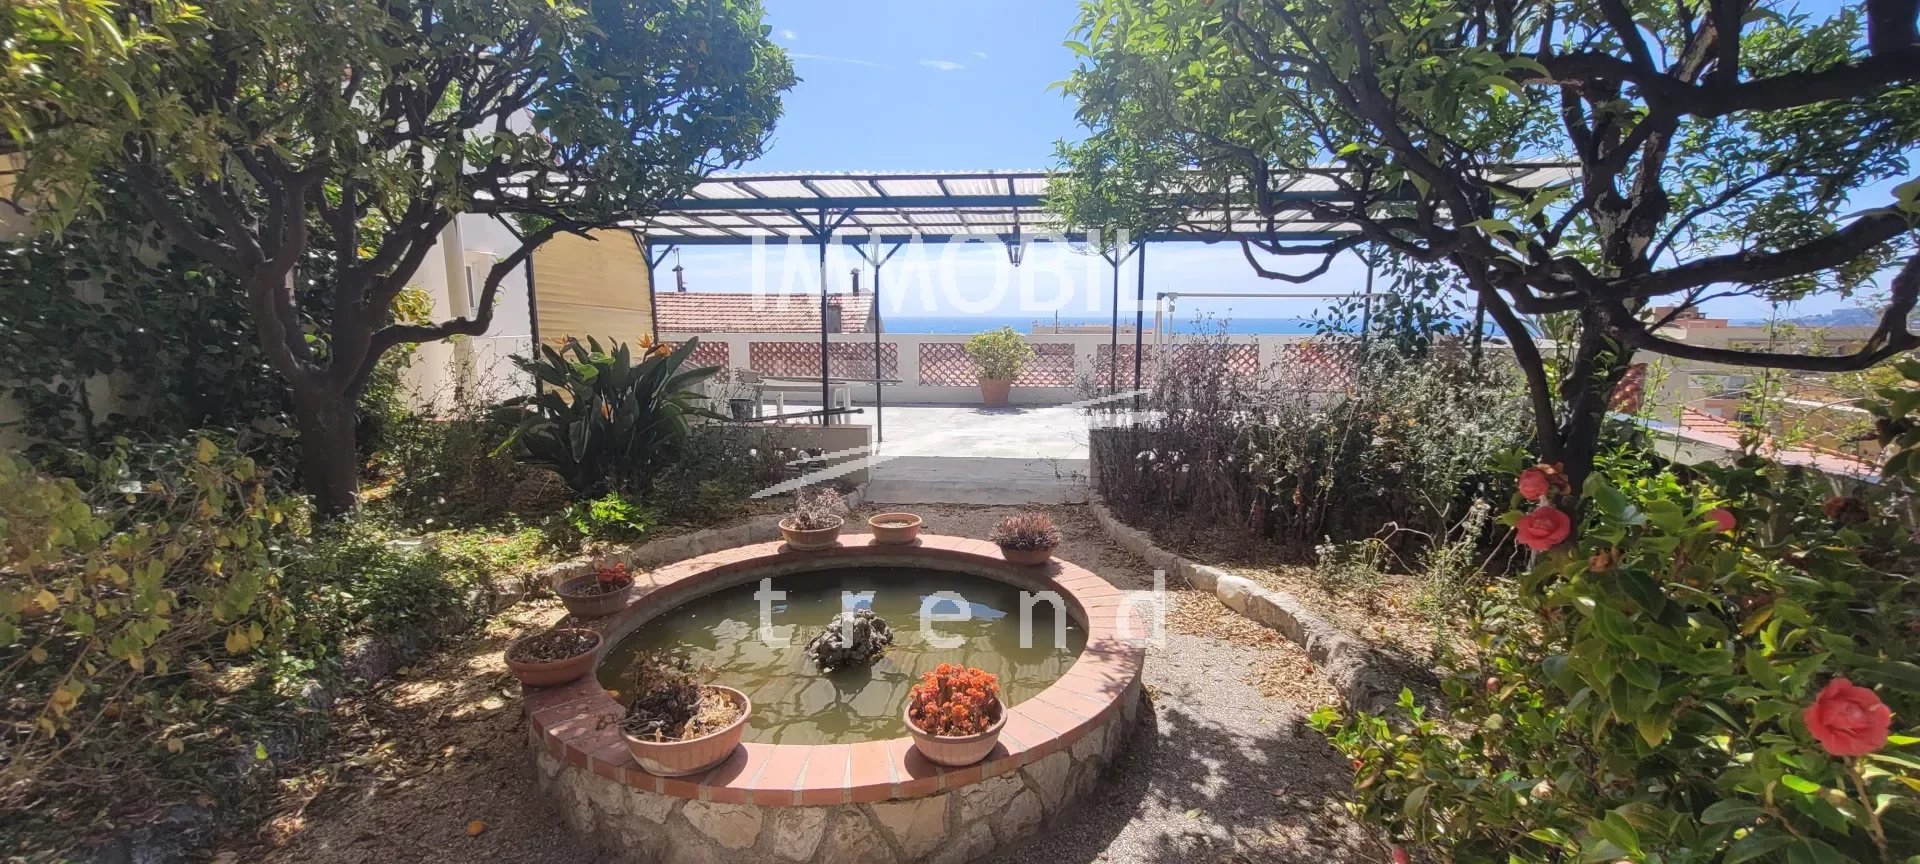 REAL ESTATE MENTON NEAR CENTER TOWN, PANORAMIC SEA VIEW, CARACTERISTIC VILLA  OF 9 ROOMS, GUEST HOUSE, GARDEN, TERRACE, BOX AND PARKING